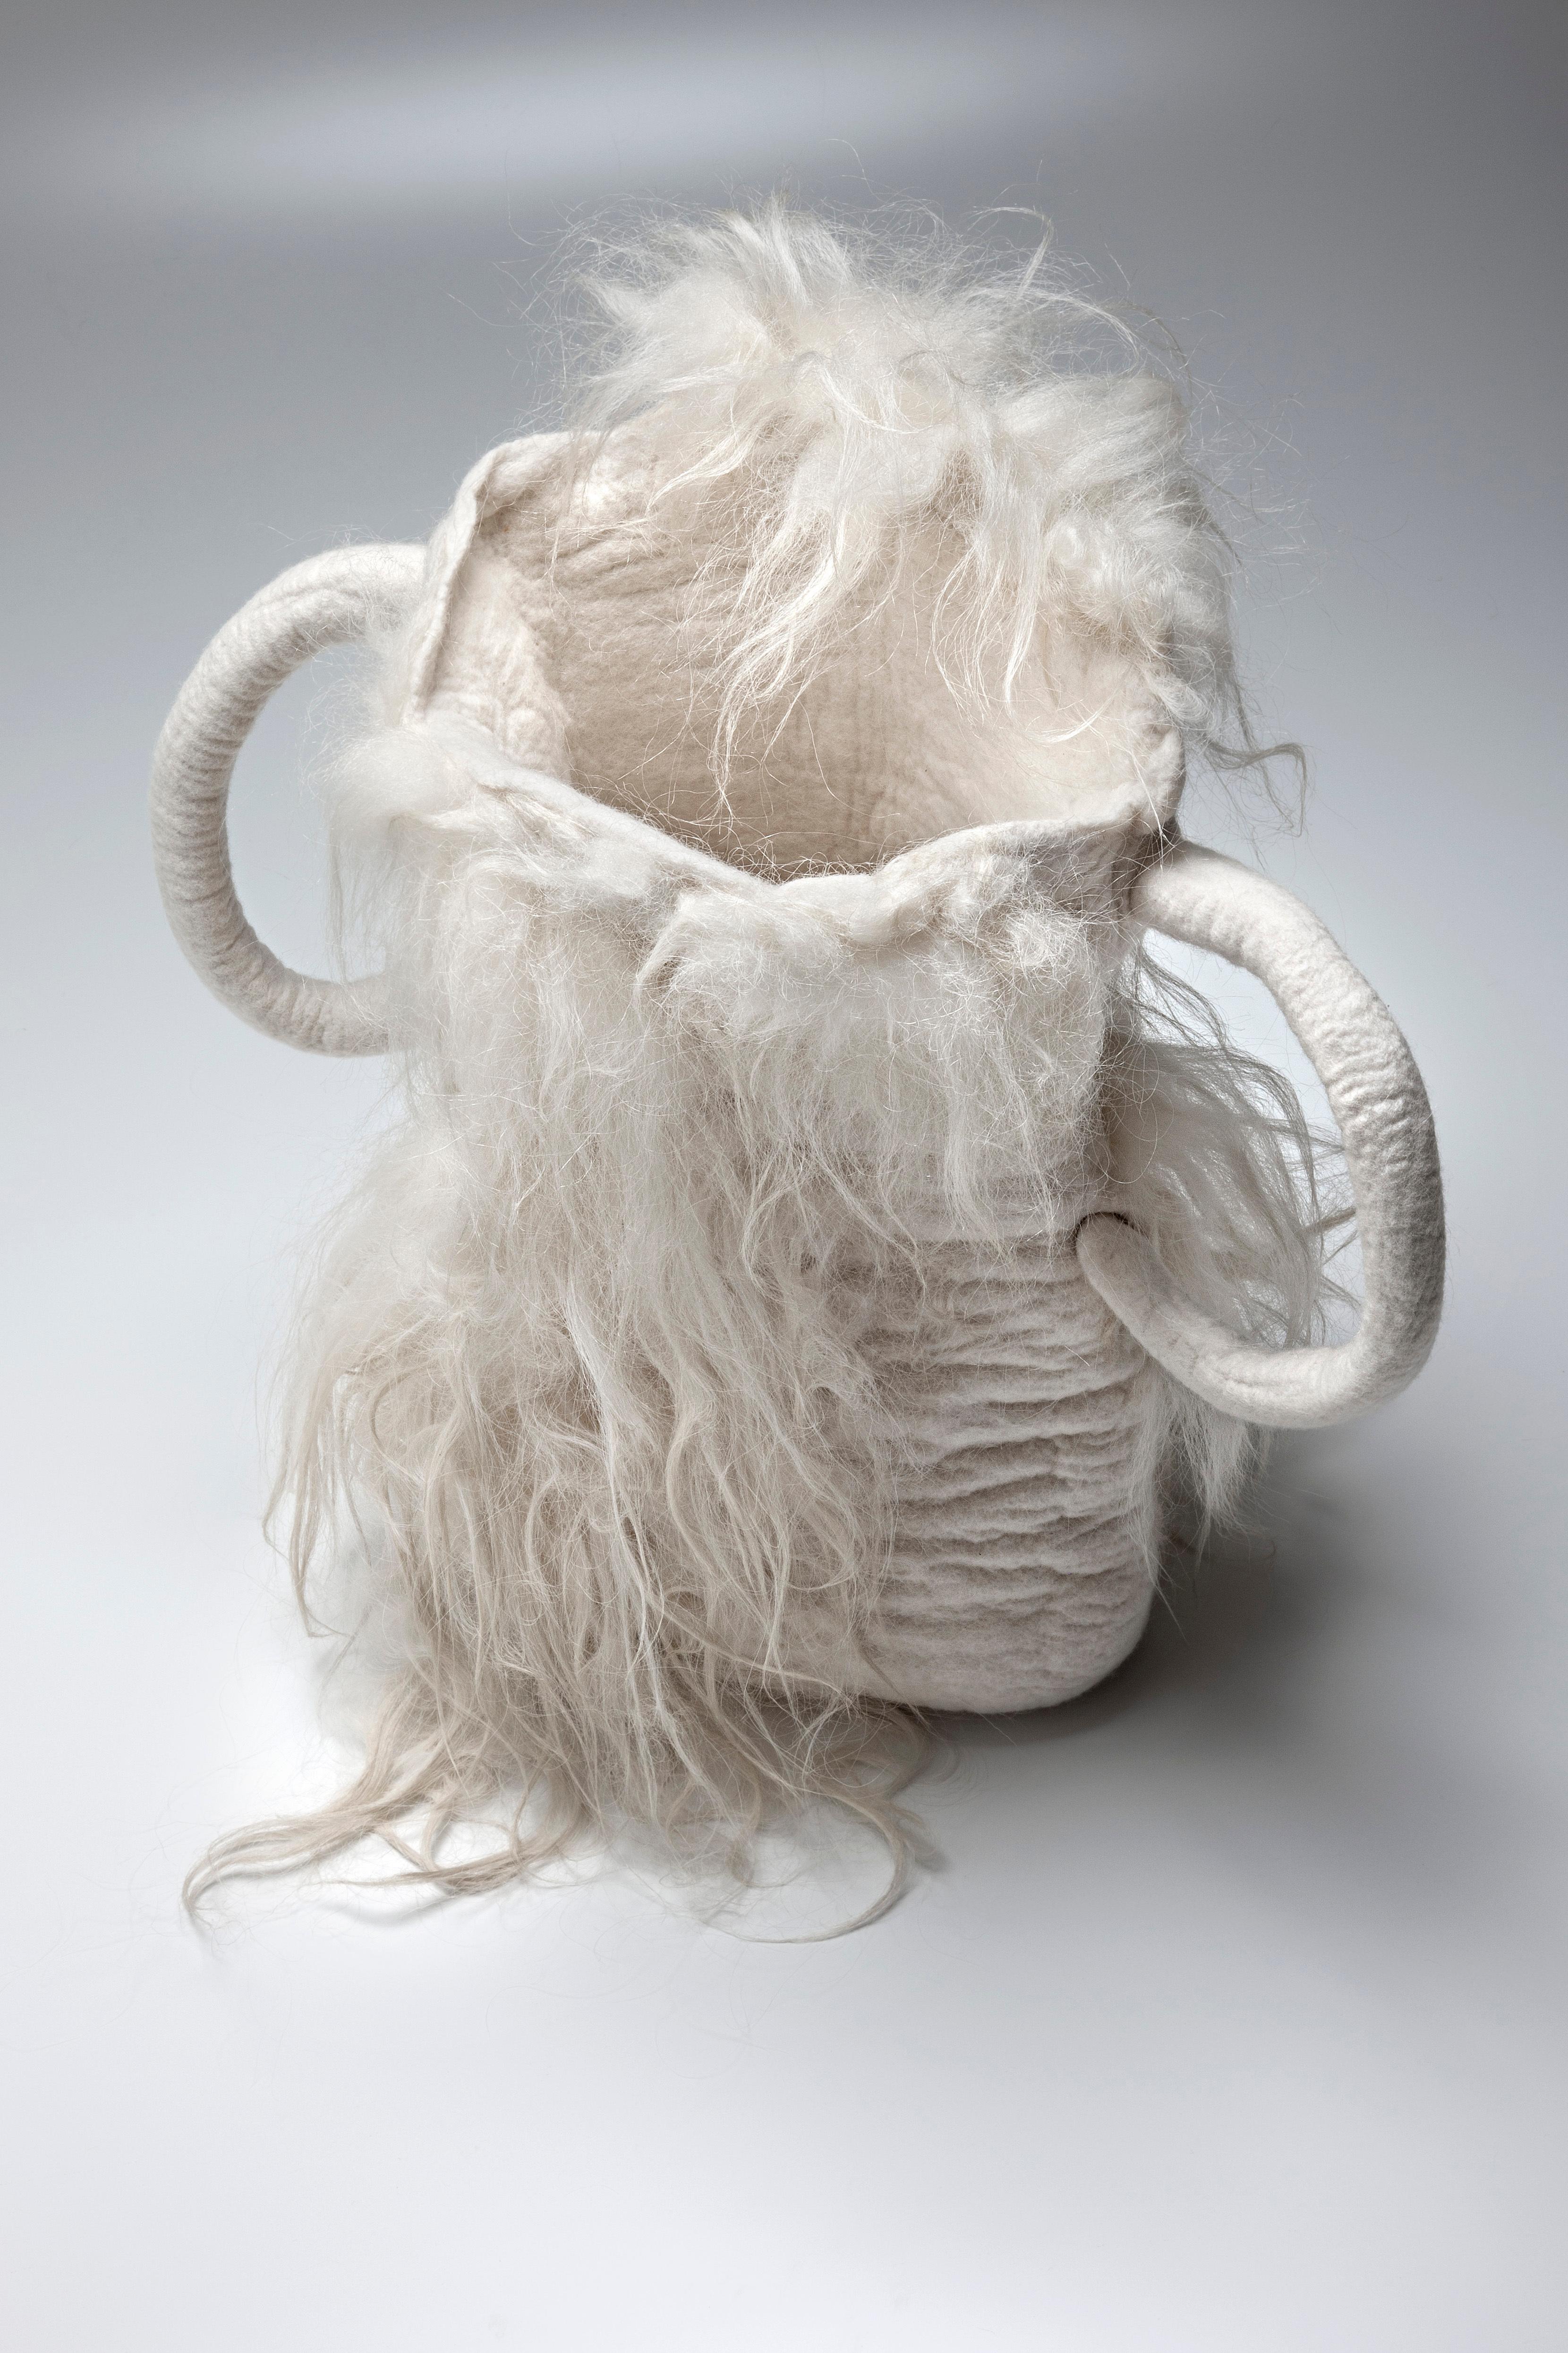 “Poeira ”, 2021, Naturally Dyed Felted Wool Vase by Inês Schertel, Brazil

Ines Schertel's primary material is sheep's wool. As a practitioner of Slow Design, the artist takes a holistic approach to textile design, personally overseeing the whole